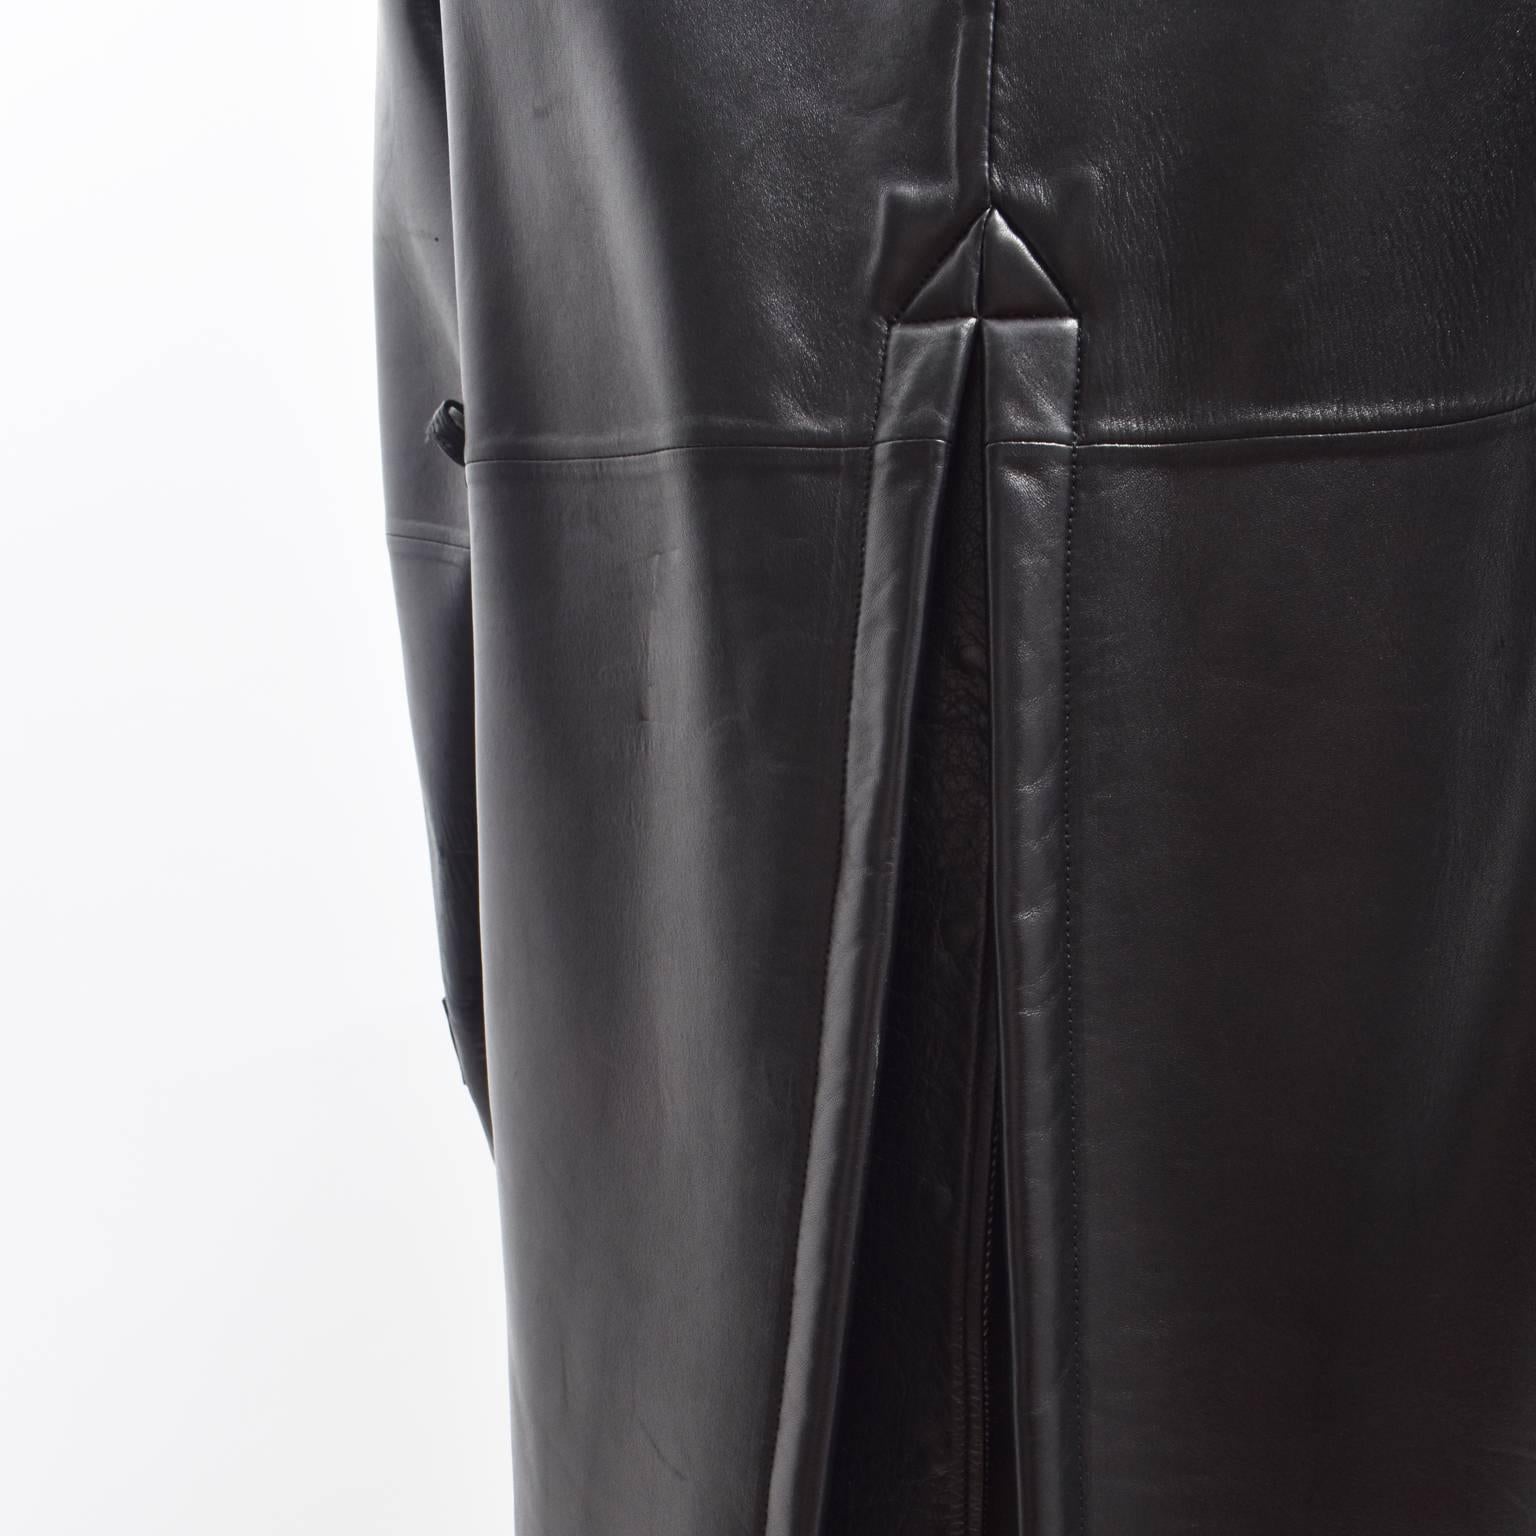 Burberry Prorsum Black Leather Long Coat A/W13 (SAMPLE) For Sale 1